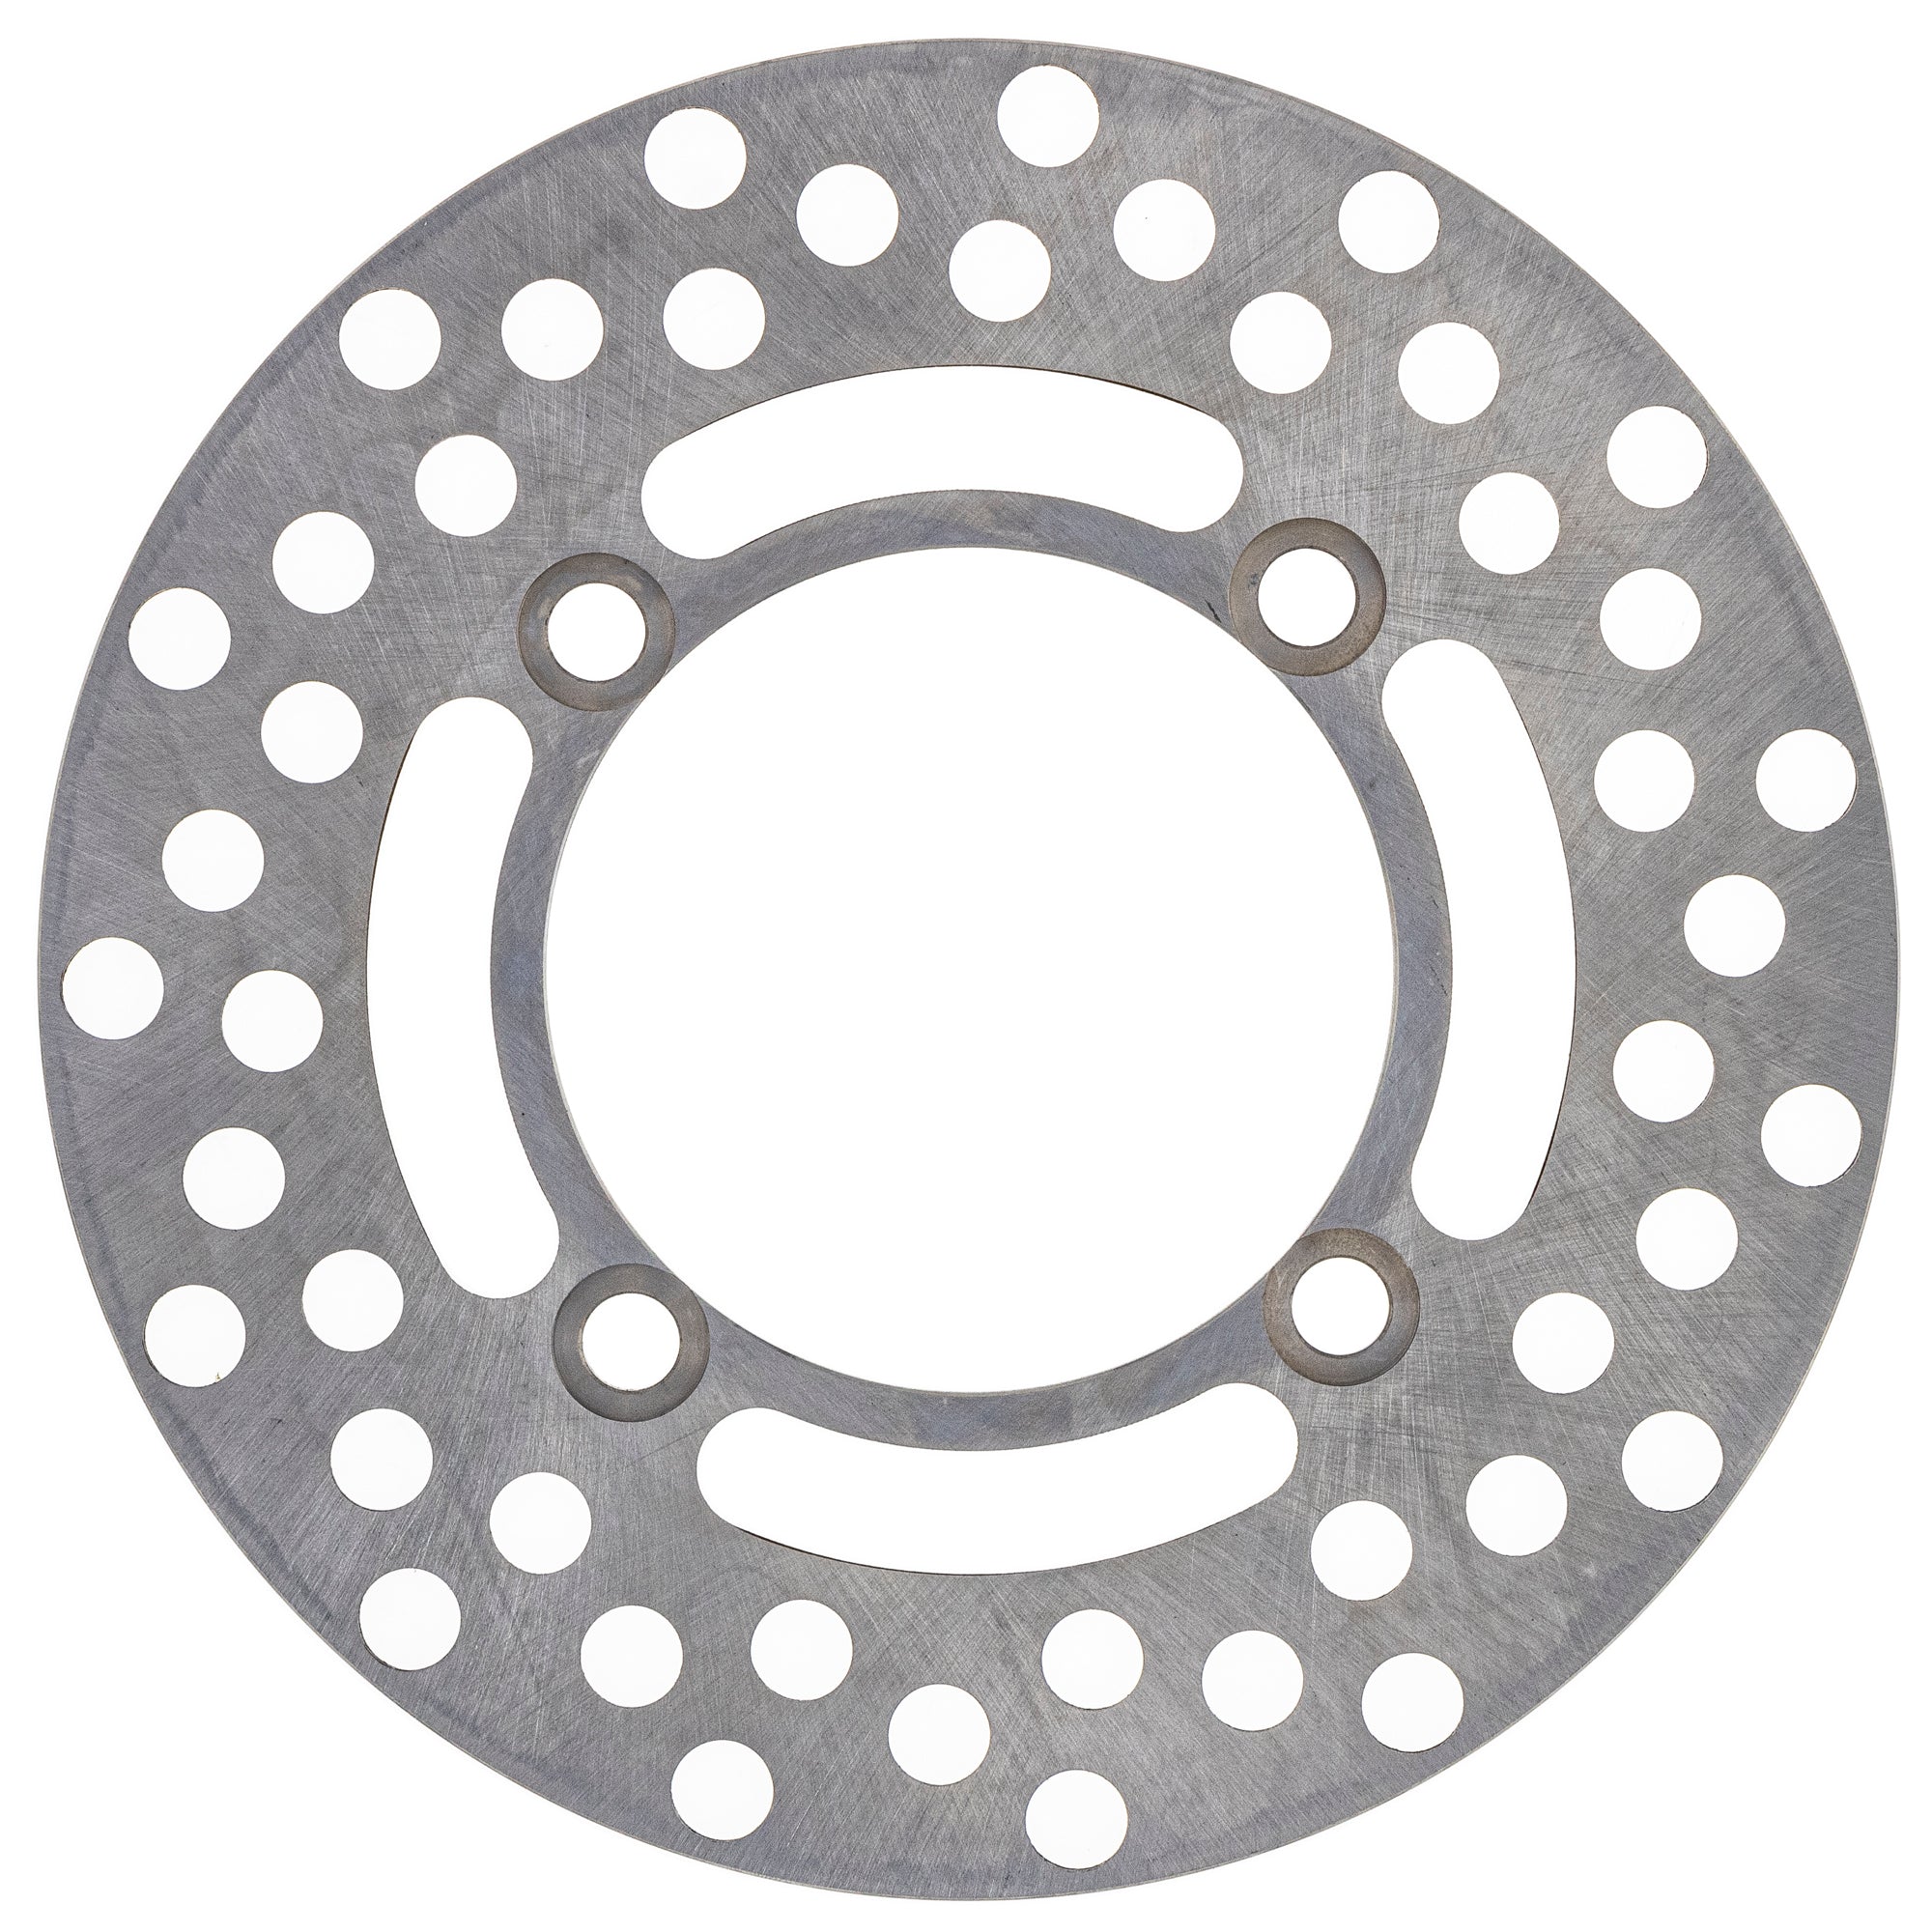 Rear Brake Rotor for zOTHER RM100 KX85 KX100 NICHE 519-CRT2376R